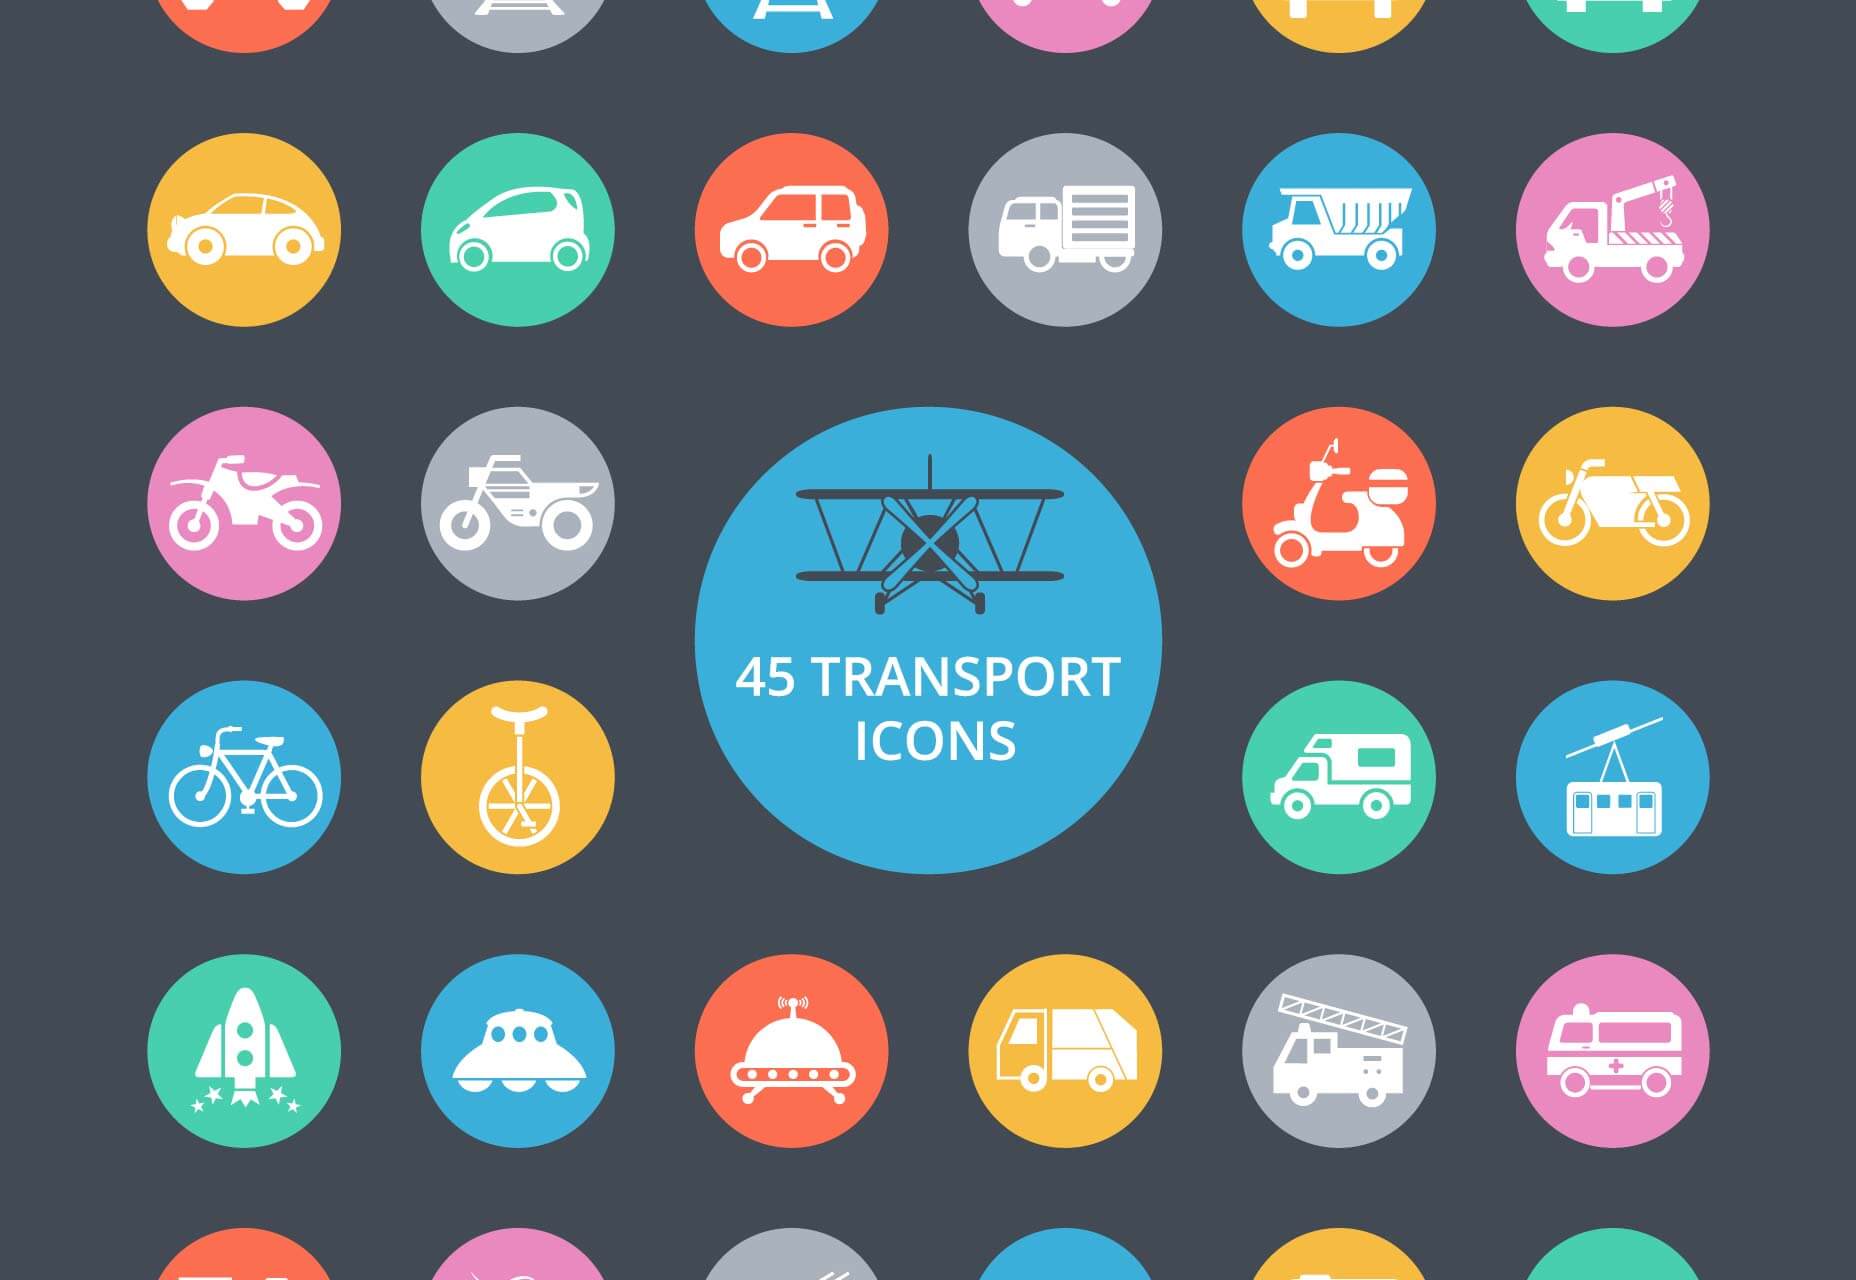 Transport Icons Download free